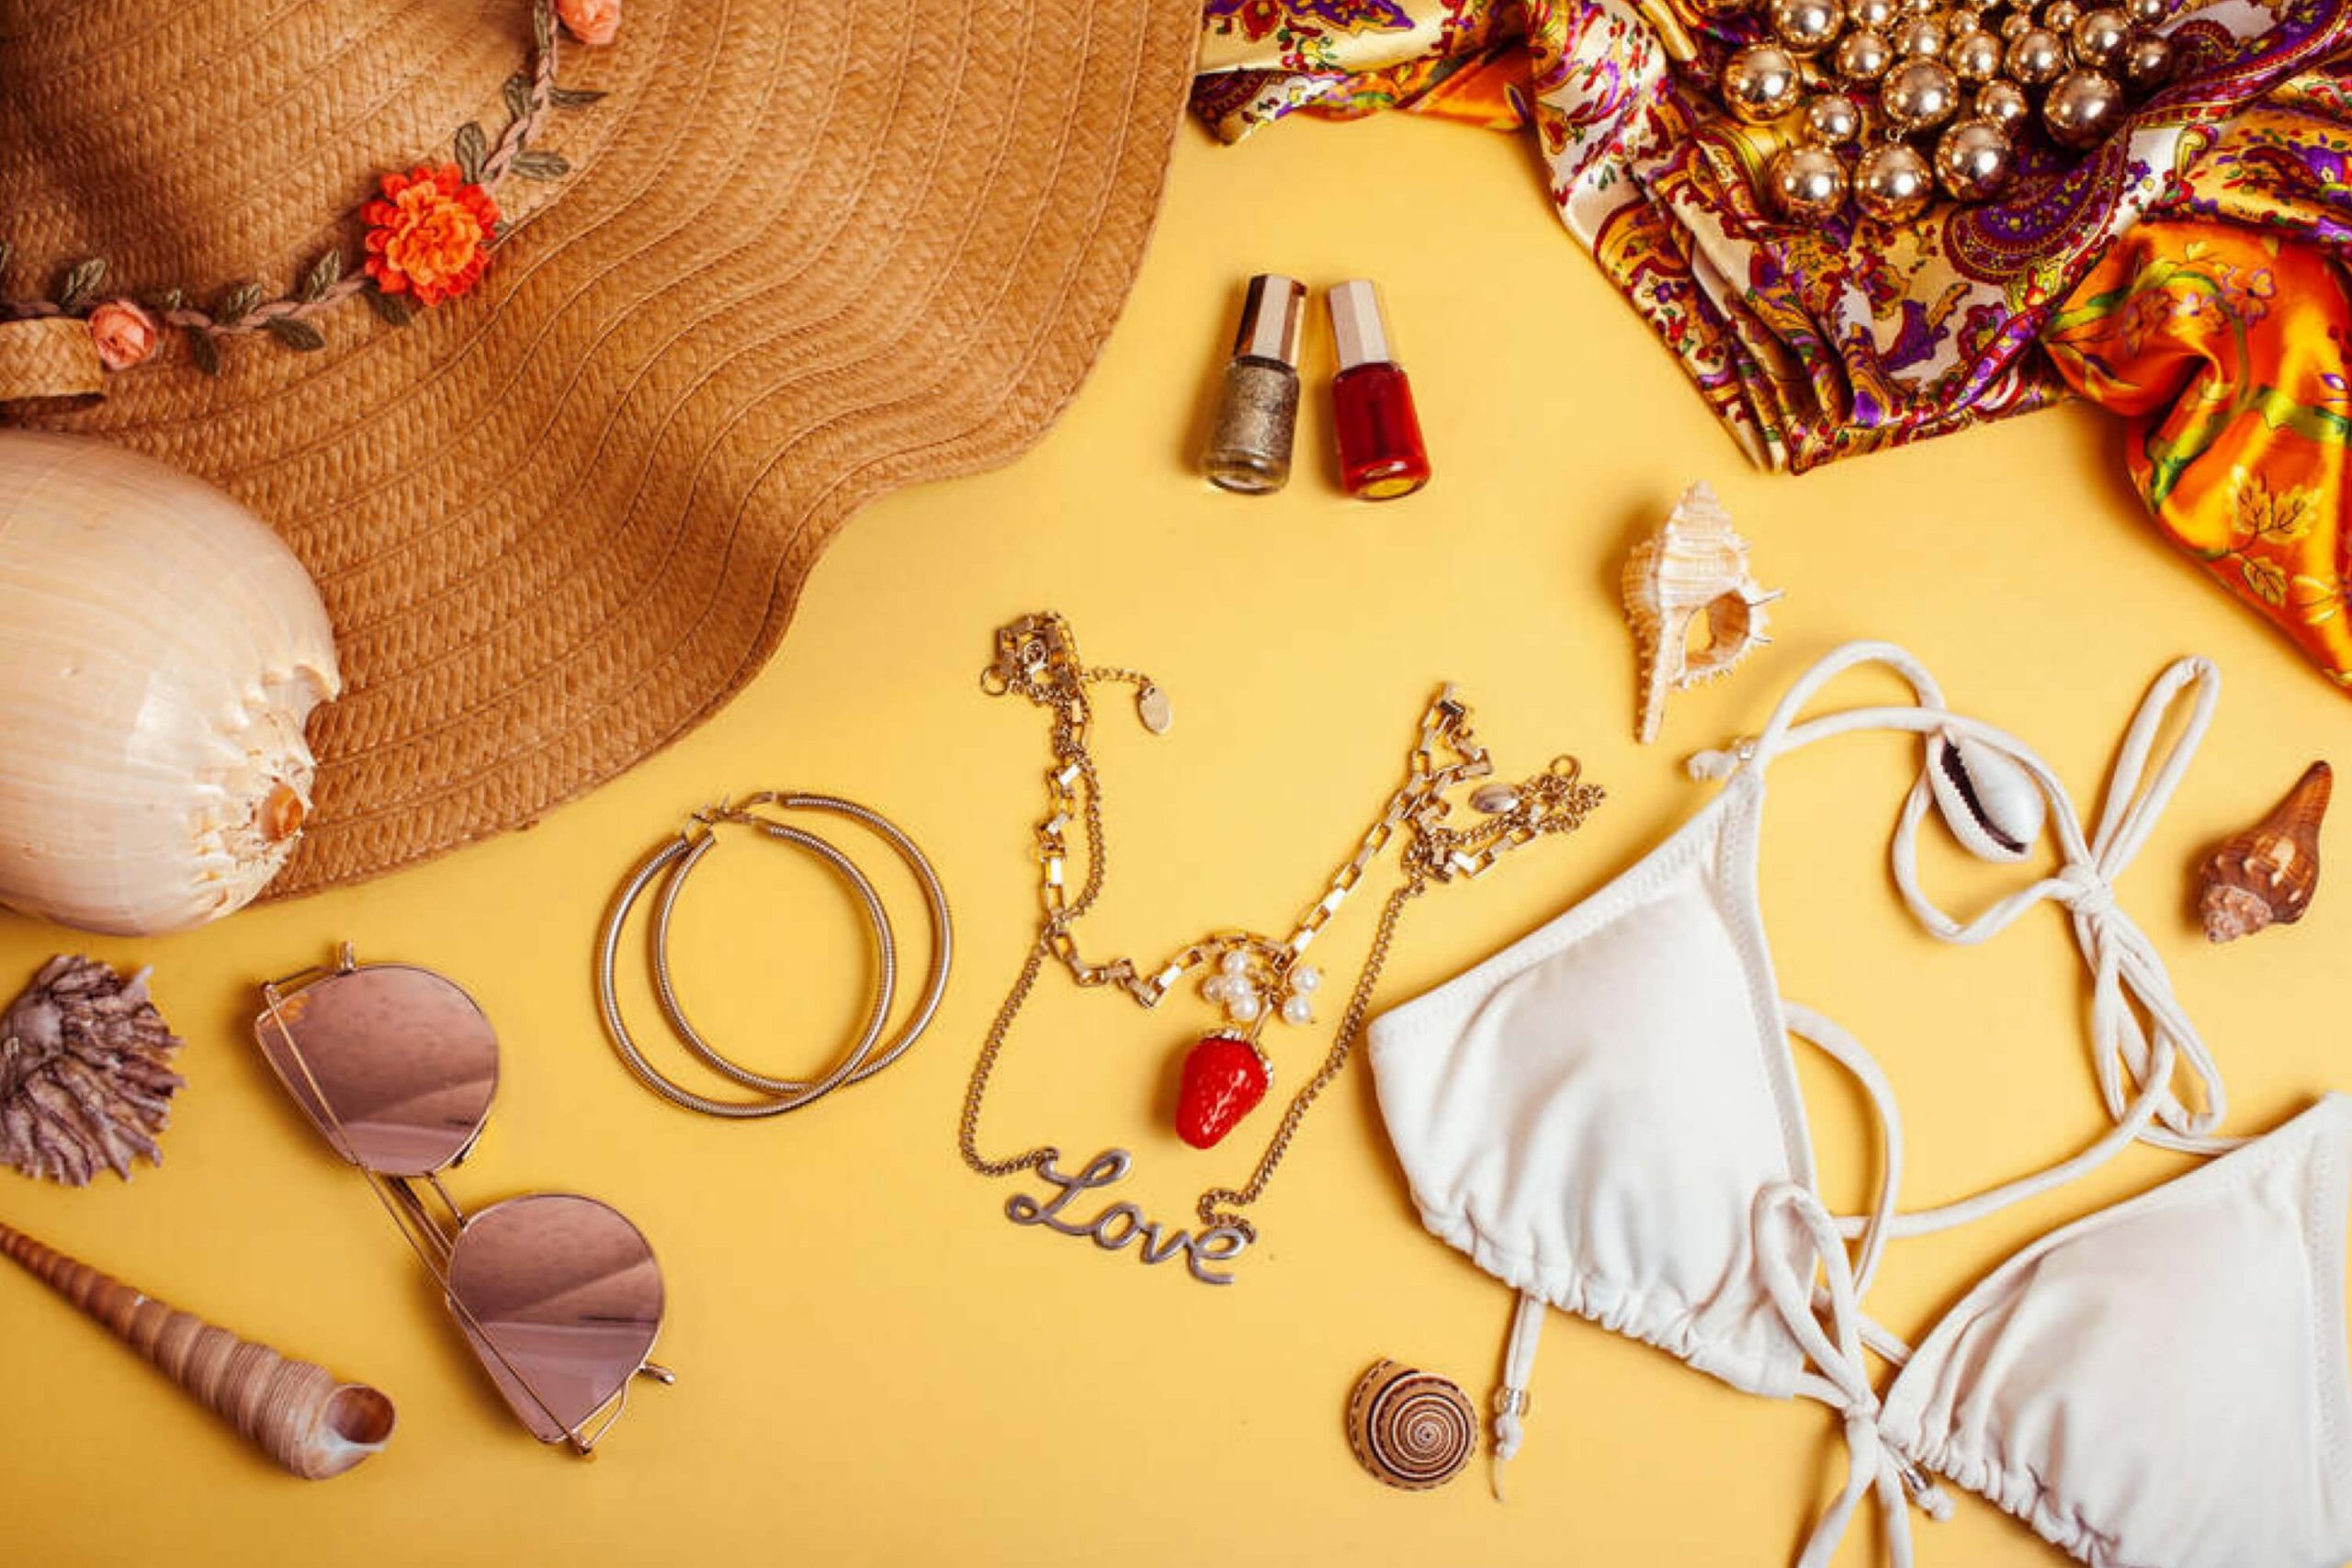 How to pack your jewelry